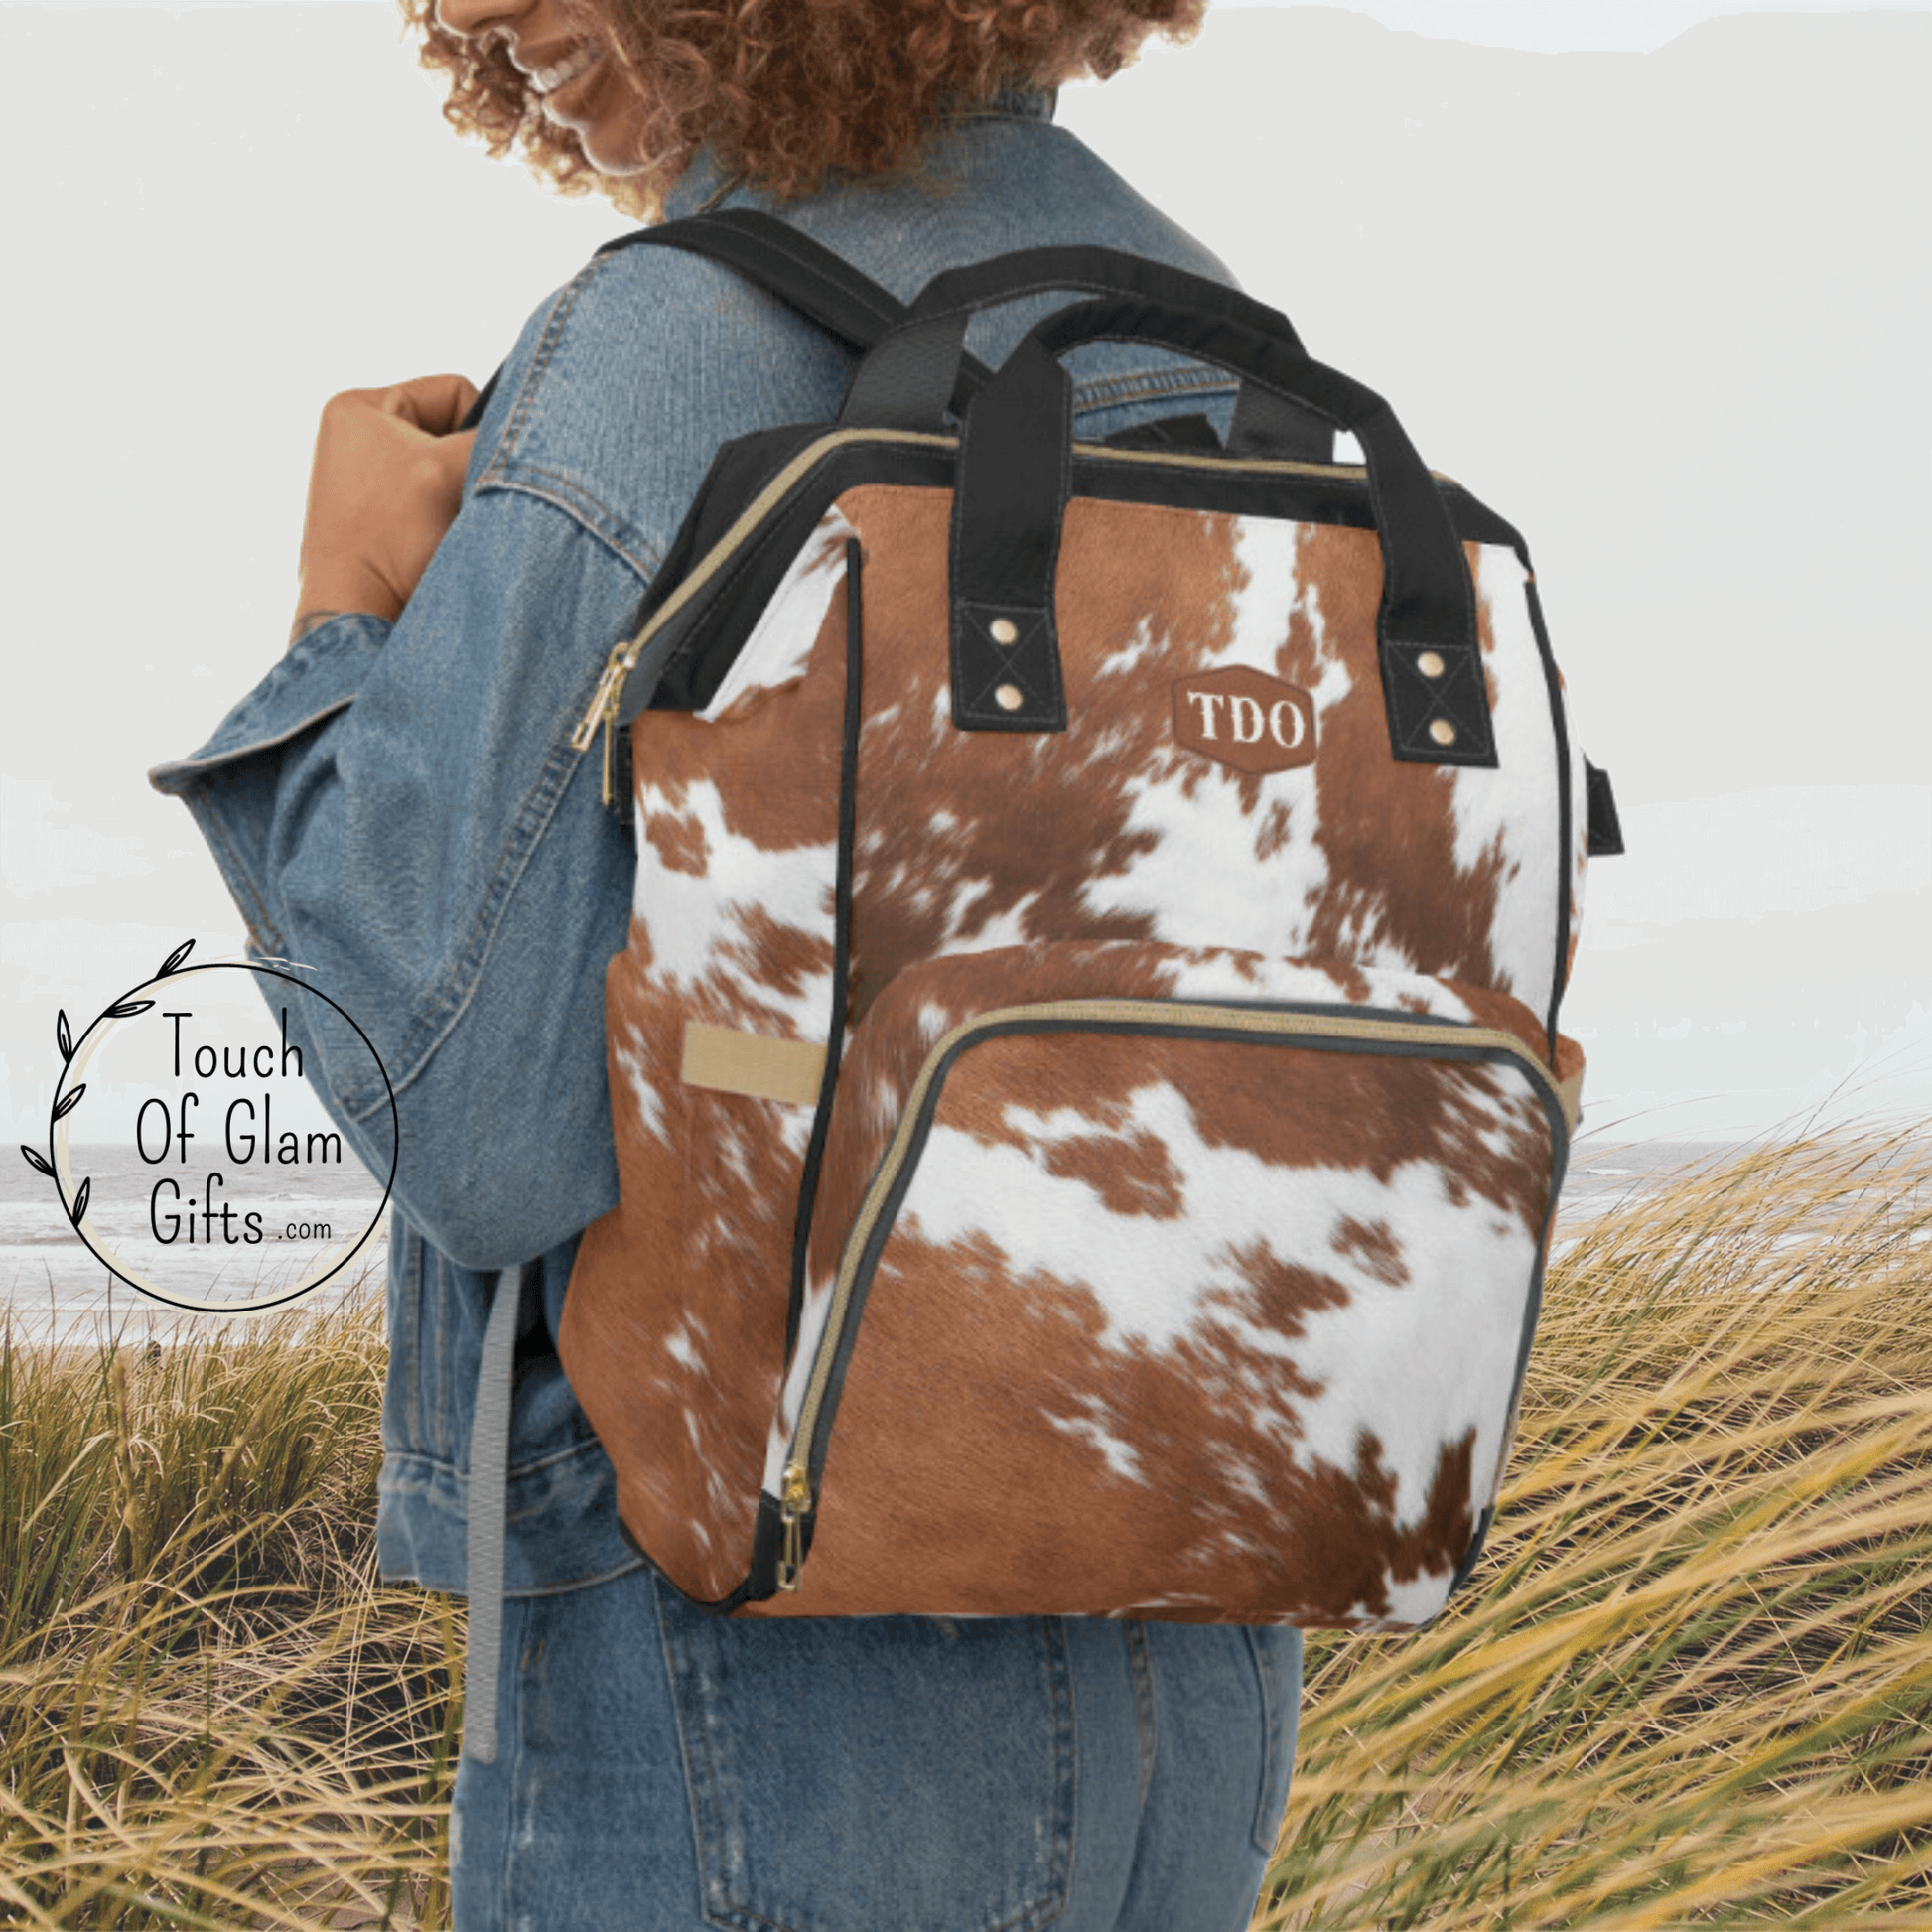 Our model is wearing the cowhide backpack over her shoulders to show the size of the personalized bag.